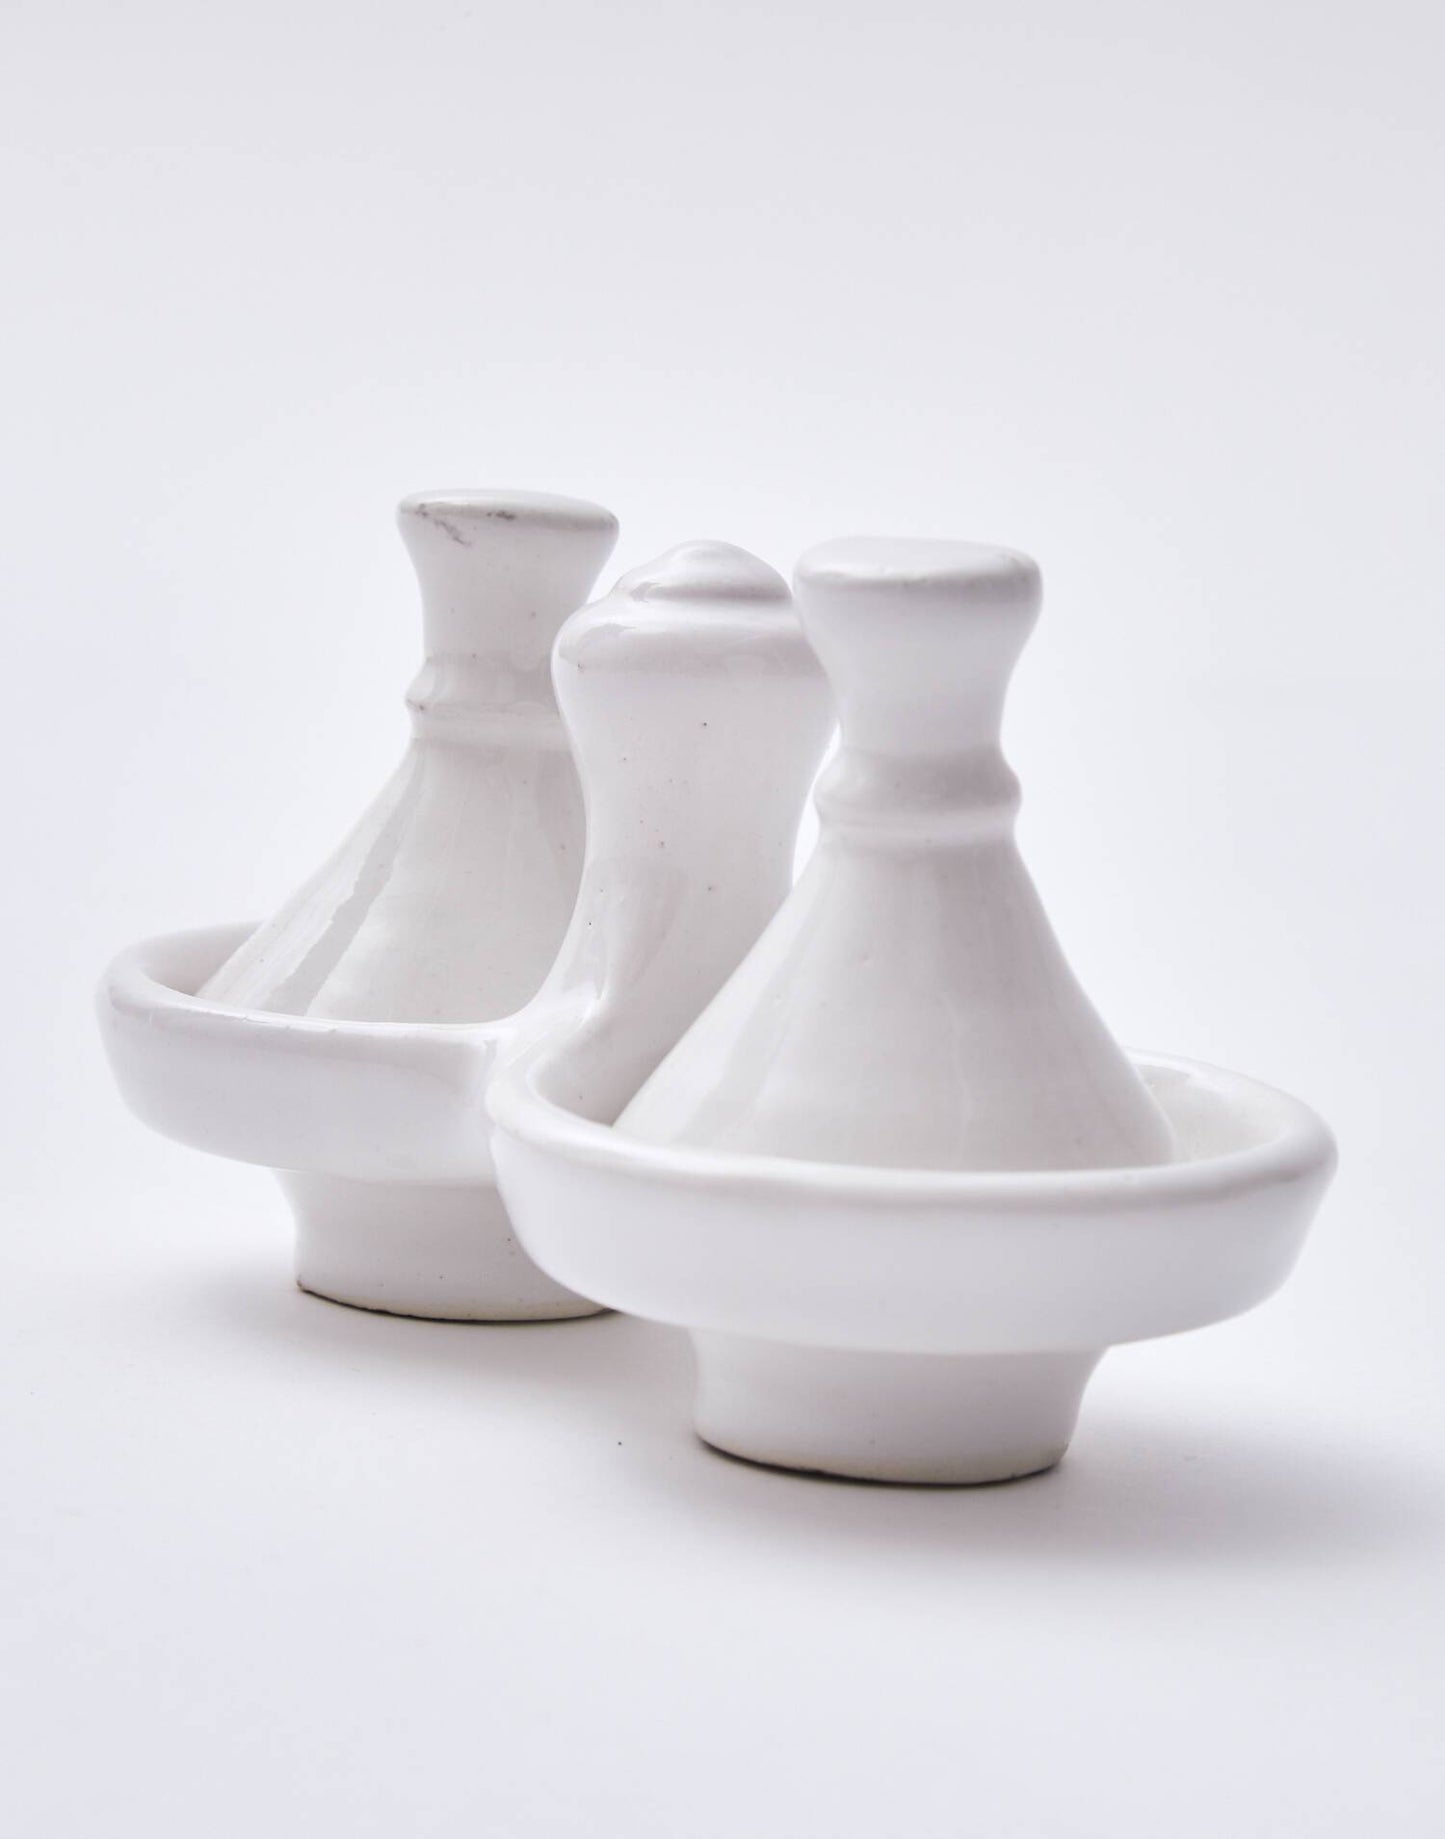 Tagine salt and pepper shakers